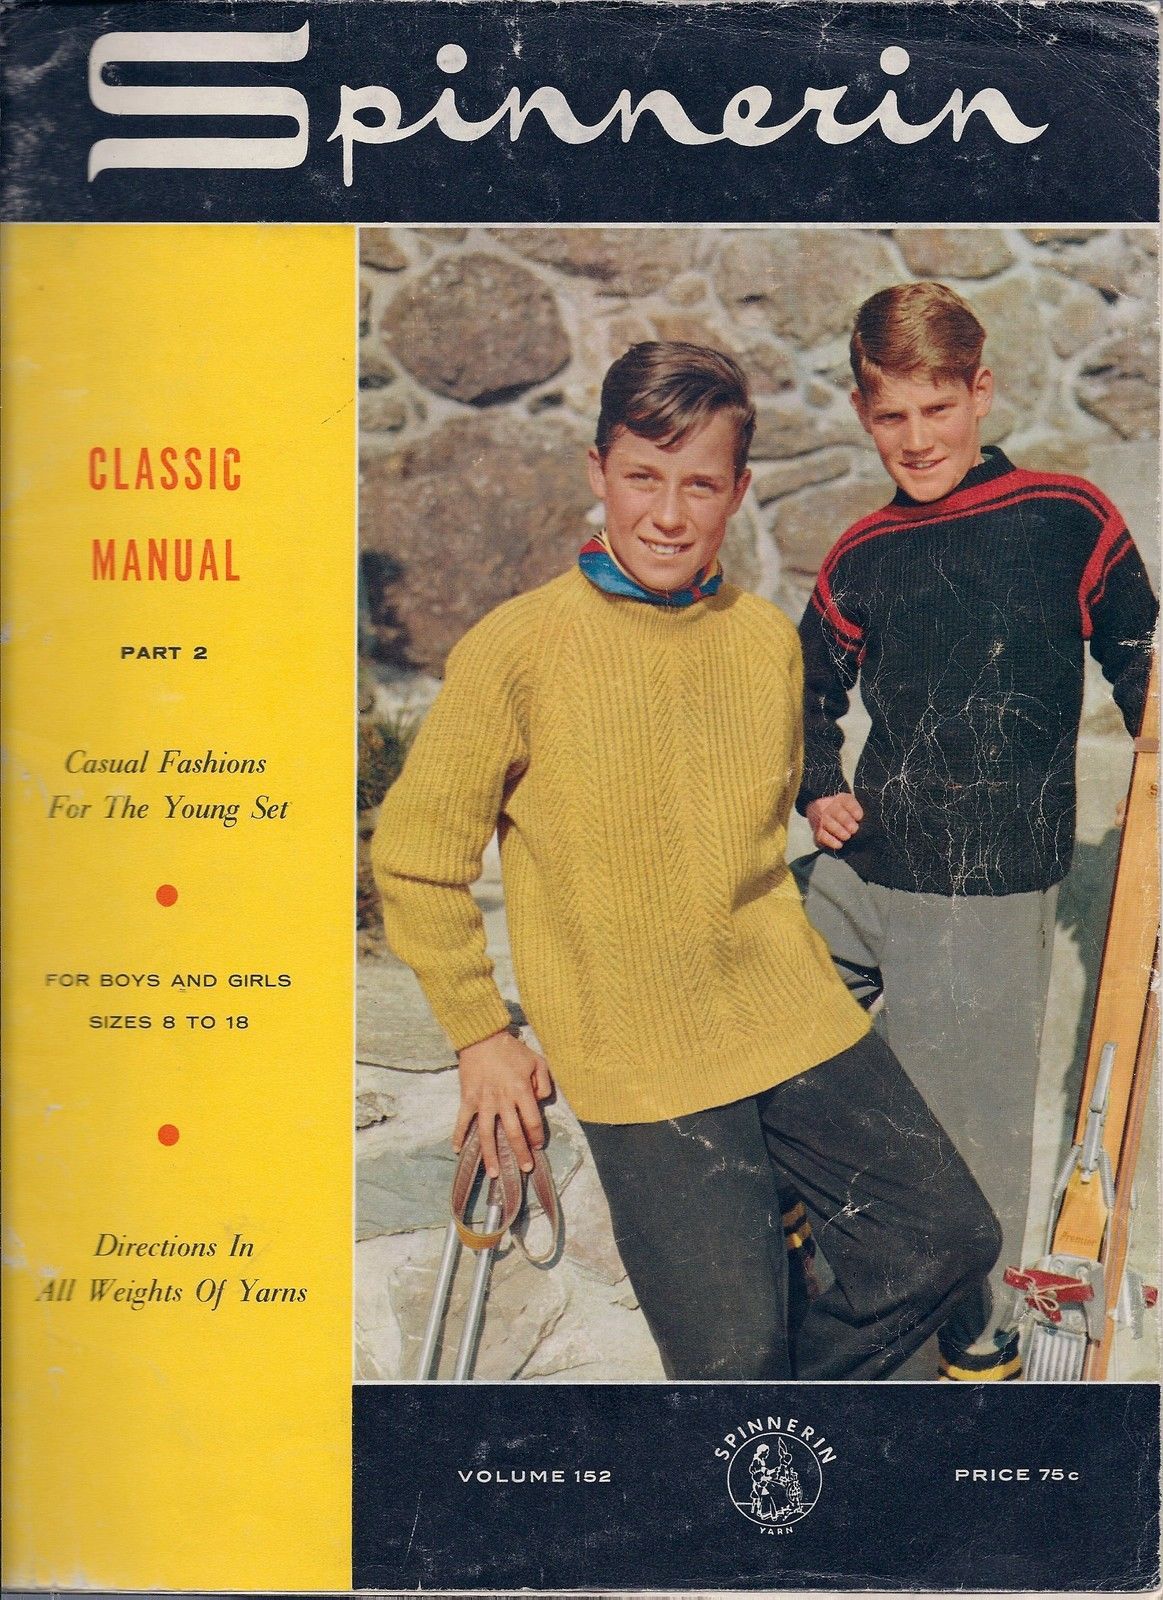 Spinnerin Yarn Craft Magazine Classic Manual Part II for Boys and Girls -1965 - $2.00